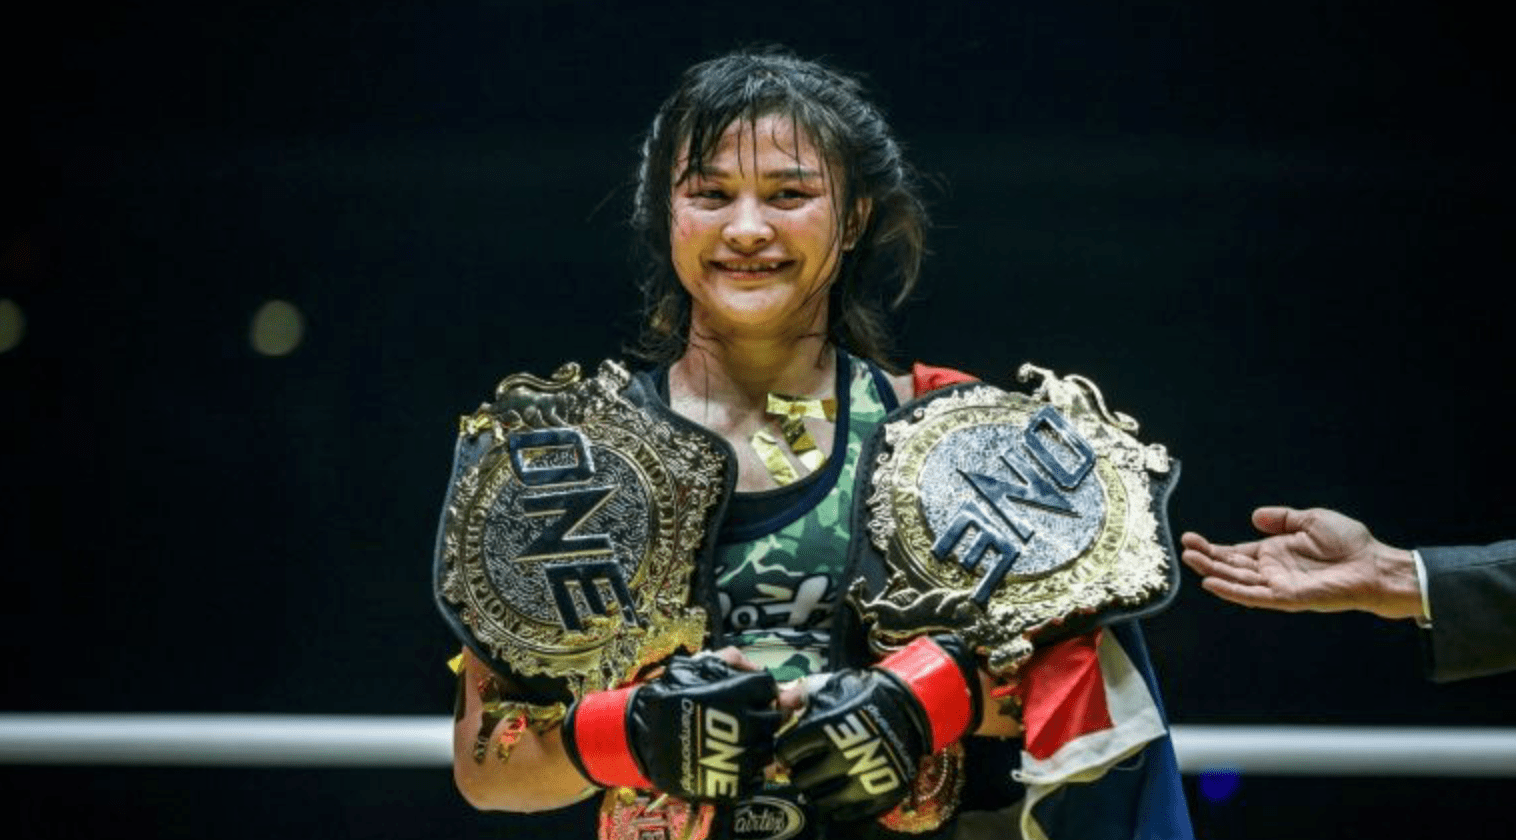 Stamp Fairtex Will Make Her MMA Debut In 2019 & Is Coming For The Belt